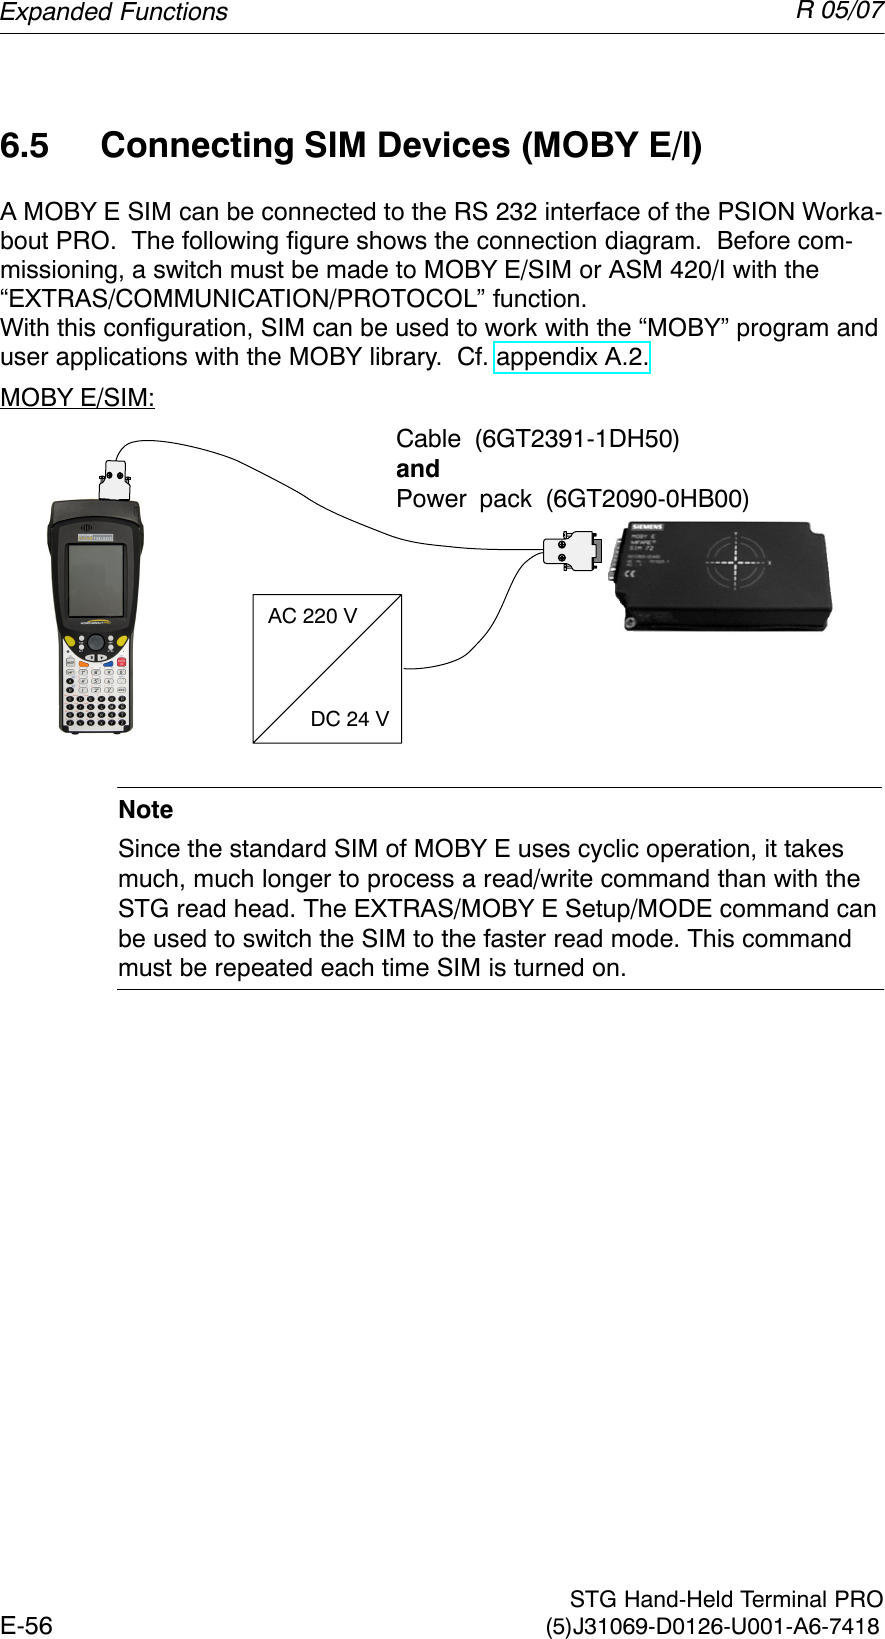 R 05/07E-56  STG Hand-Held Terminal PRO(5)J31069-D0126-U001-A6-74186.5 Connecting SIM Devices (MOBY E/I)A MOBY E SIM can be connected to the RS 232 interface of the PSION Worka-bout PRO.  The following figure shows the connection diagram.  Before com-missioning, a switch must be made to MOBY E/SIM or ASM 420/I with the “EXTRAS/COMMUNICATION/PROTOCOL” function.With this configuration, SIM can be used to work with the “MOBY” program anduser applications with the MOBY library.  Cf. appendix A.2.MOBY E/SIM:Cable (6GT2391-1DH50)andPower pack (6GT2090-0HB00)AC 220 VDC 24 VNoteSince the standard SIM of MOBY E uses cyclic operation, it takesmuch, much longer to process a read/write command than with theSTG read head. The EXTRAS/MOBY E Setup/MODE command canbe used to switch the SIM to the faster read mode. This commandmust be repeated each time SIM is turned on.Expanded Functions